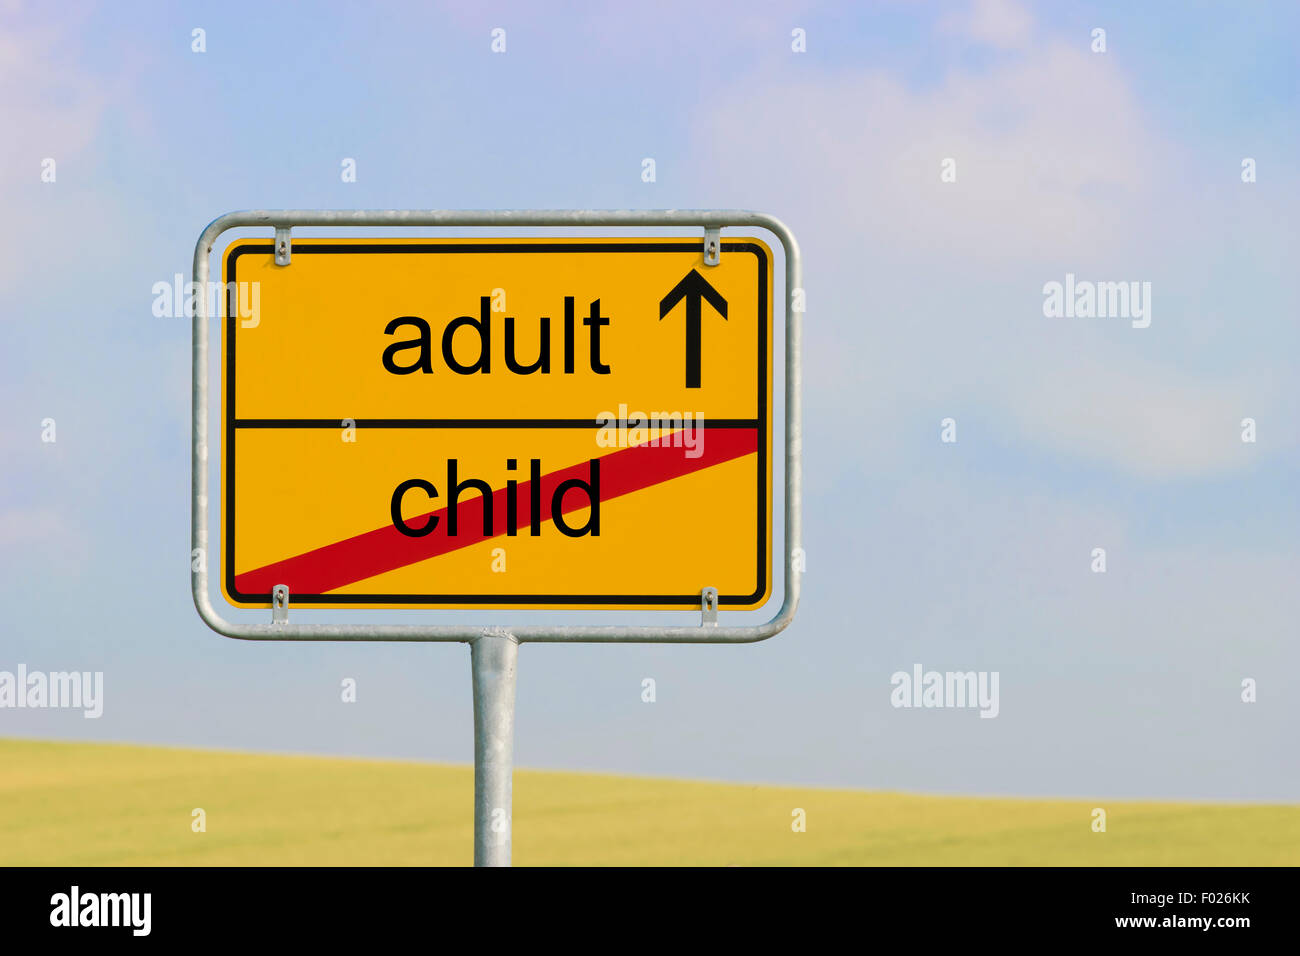 Yellow town sign with text 'child adult' Stock Photo